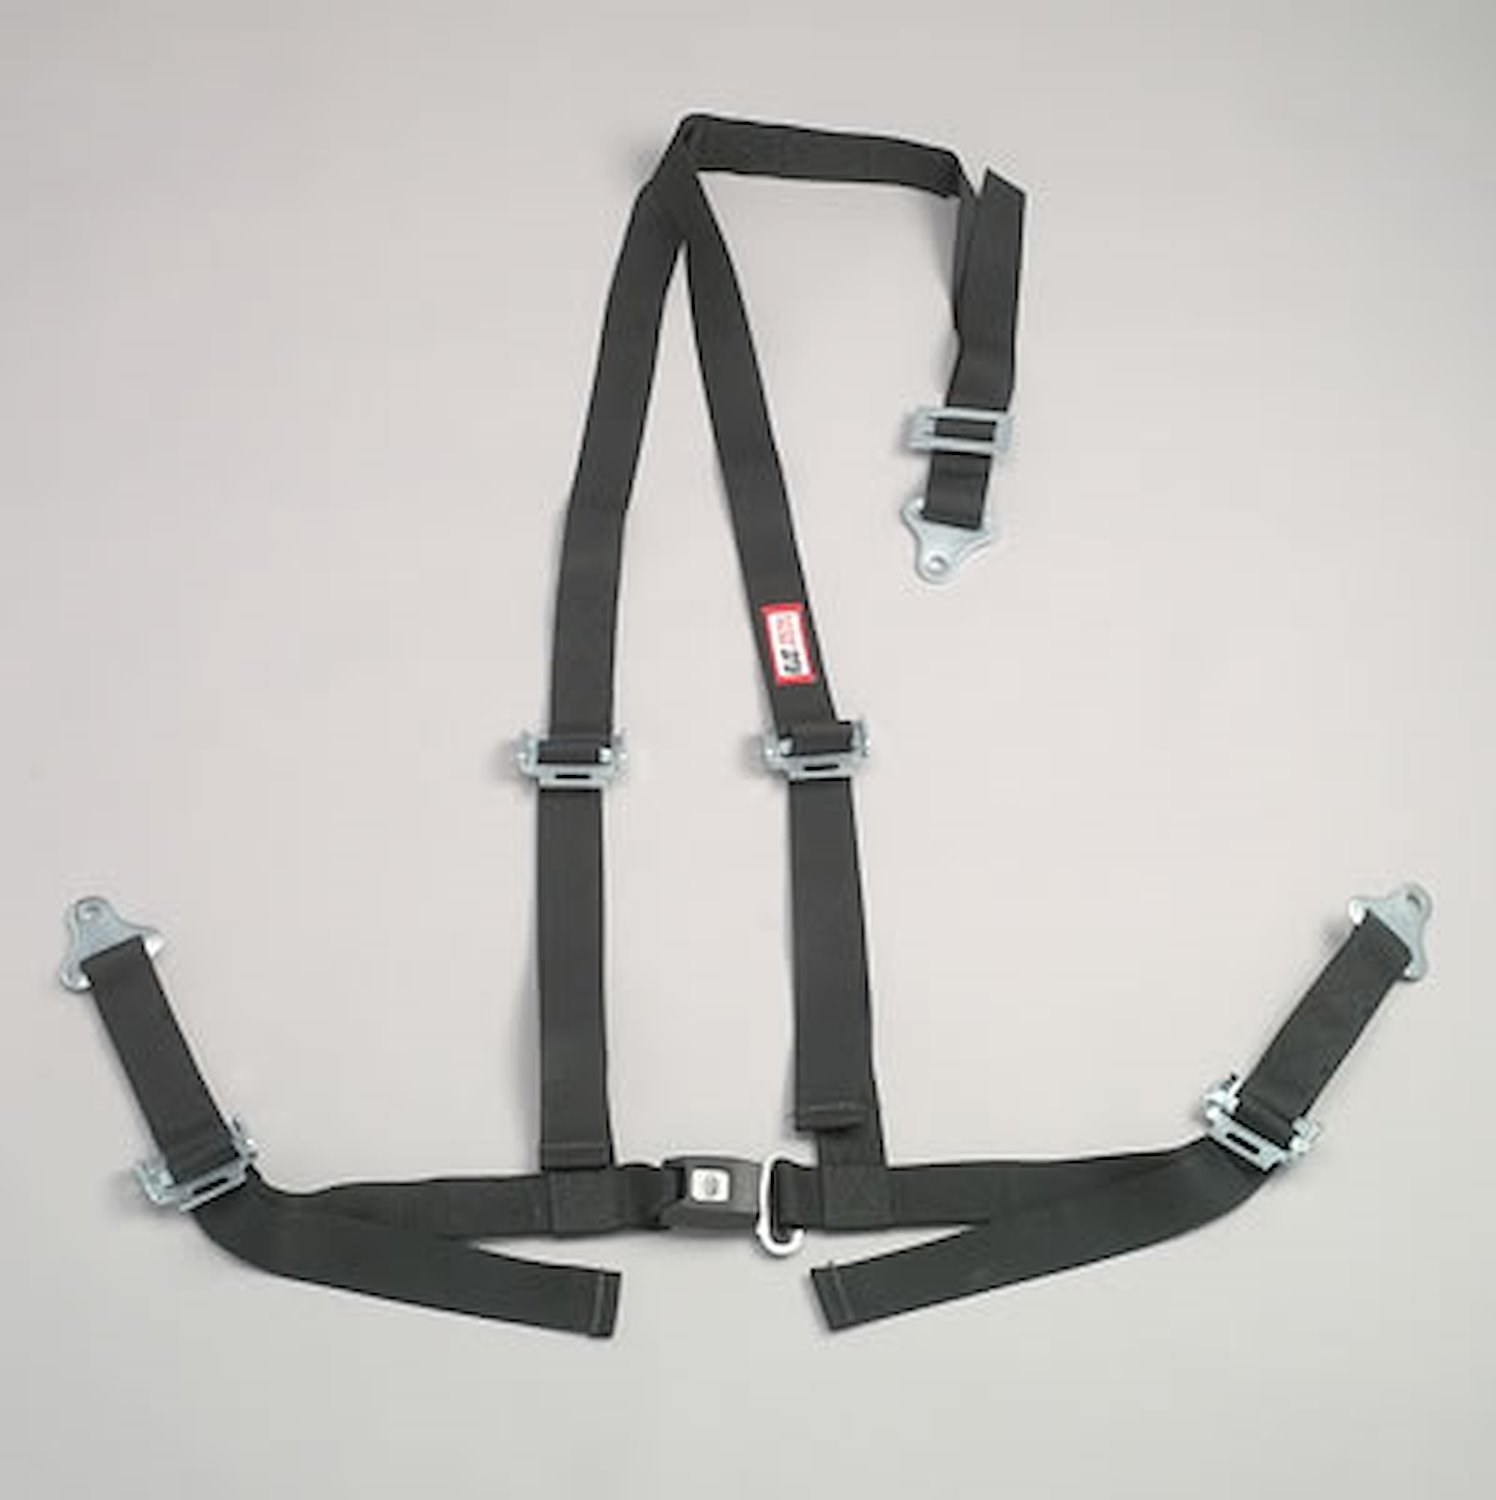 NON-SFI B&T HARNESS 2 PULL DOWN Lap Belt 2 S. H. Y FLOOR Mount ALL WRAP ENDS w/STERNUM STRAP BLACK